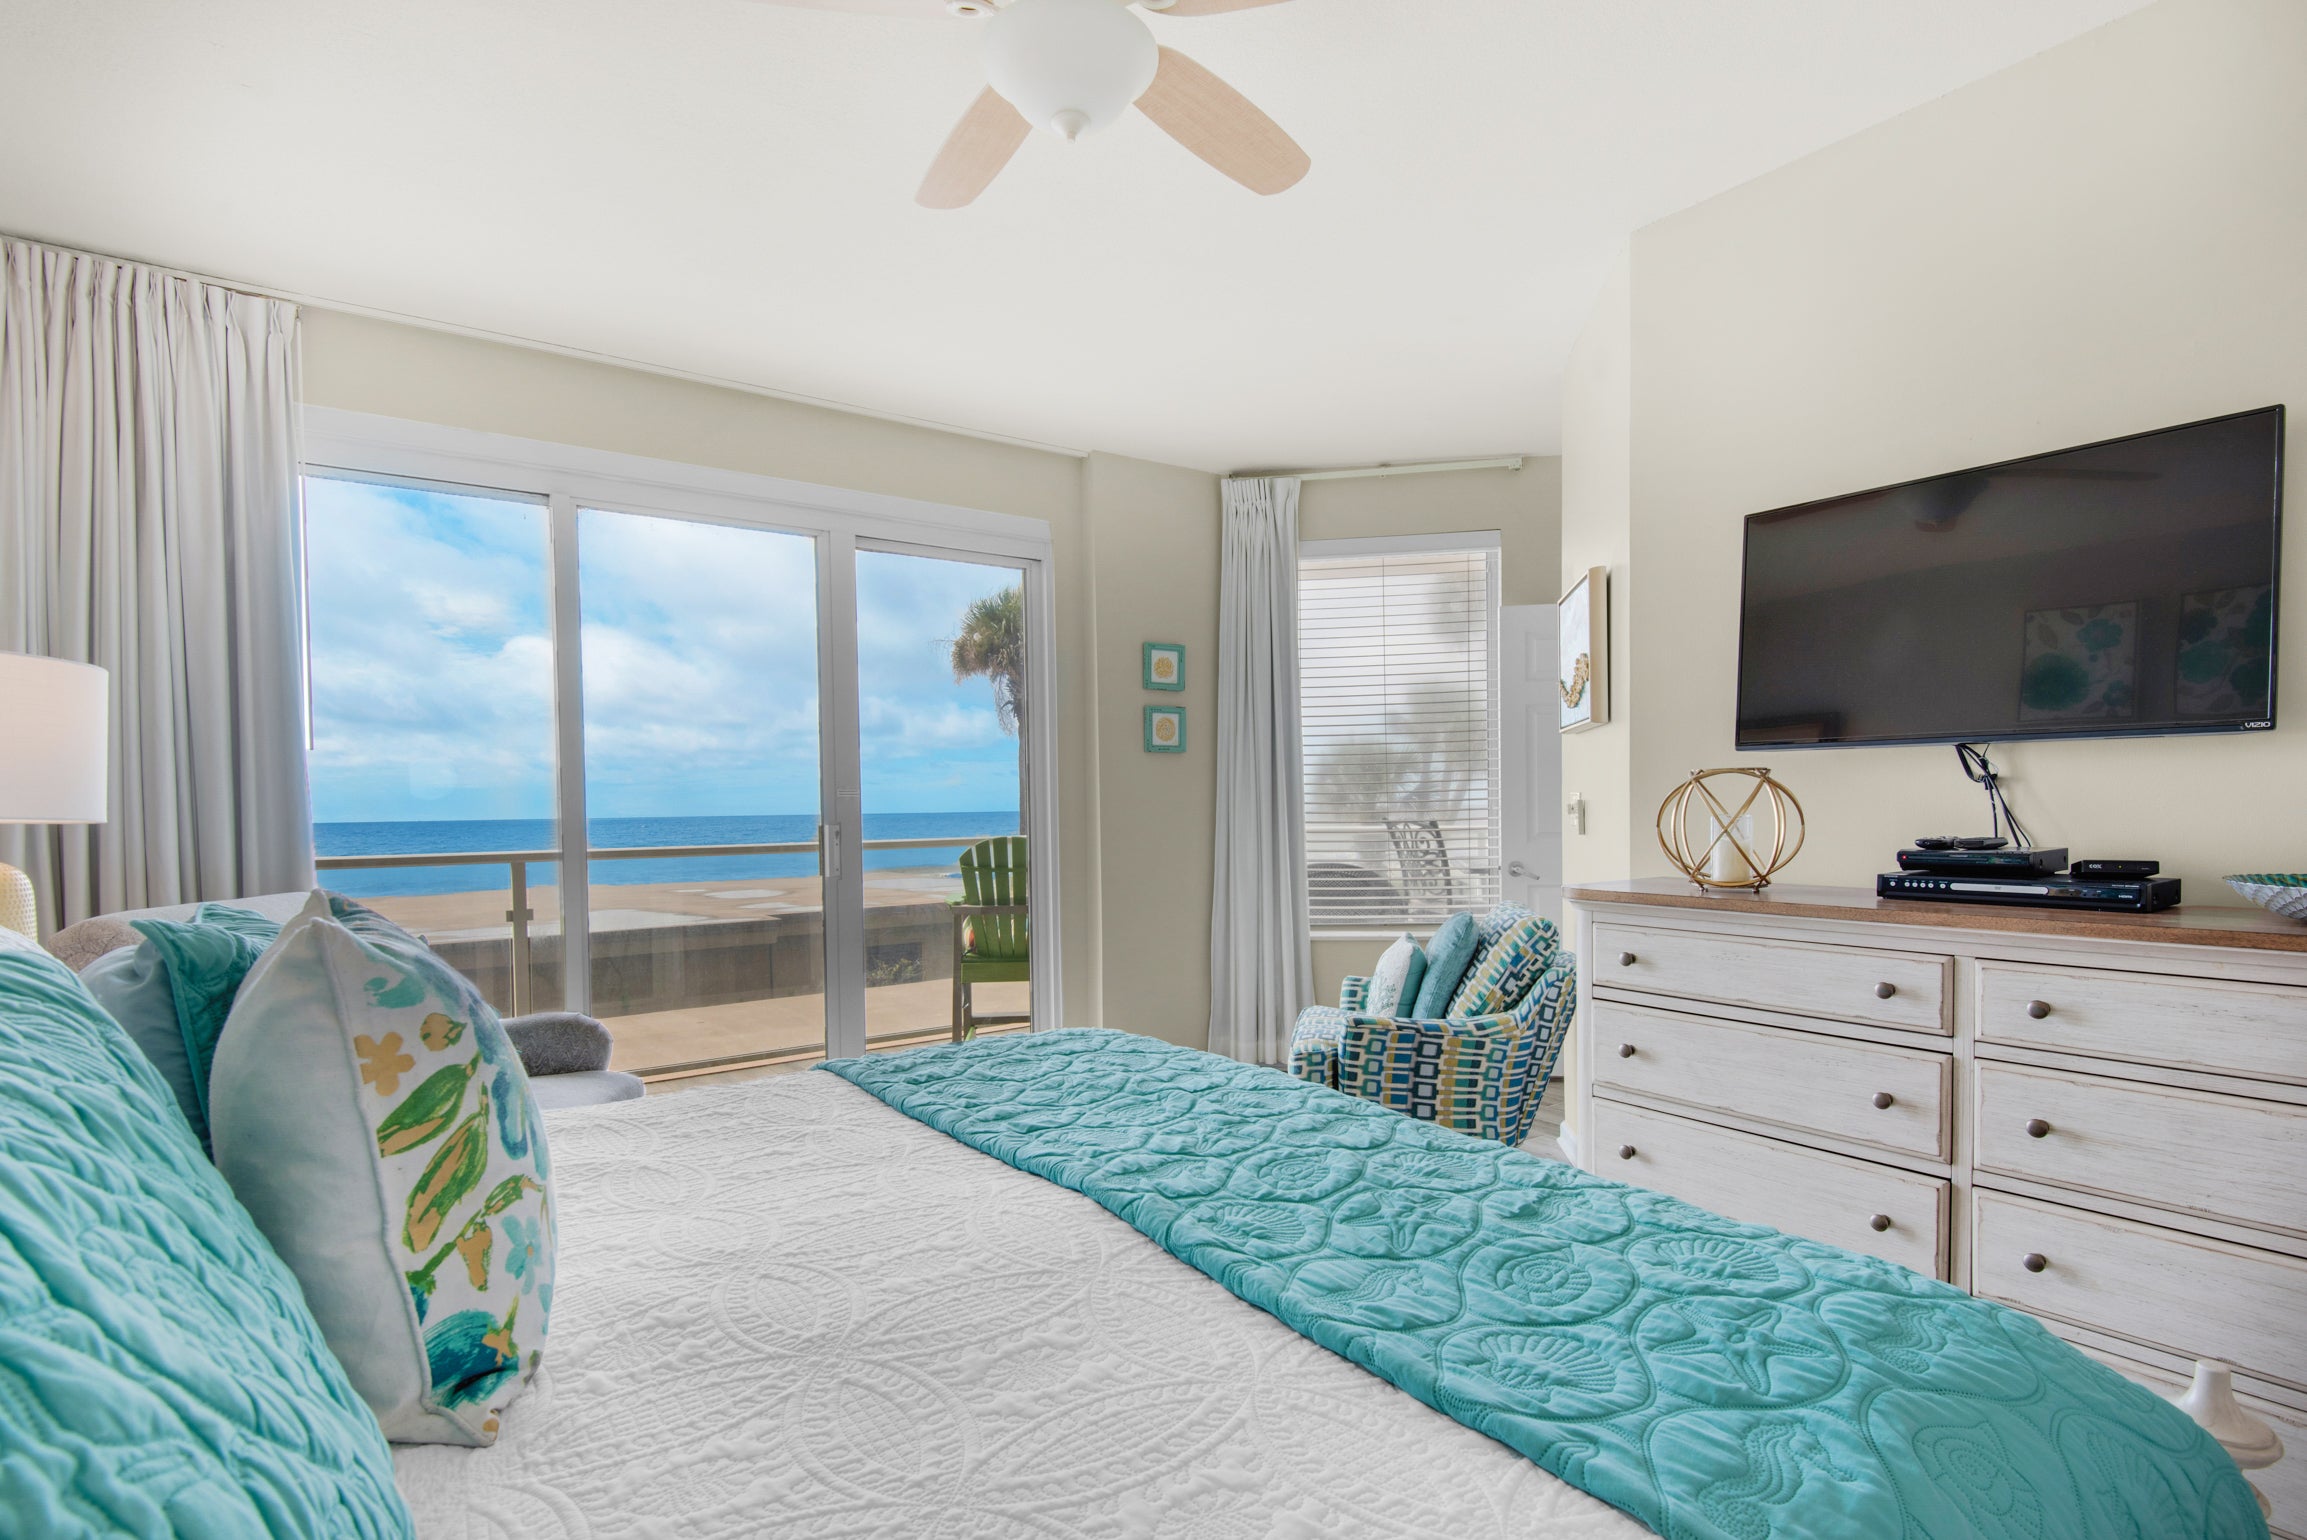 Guest bedroom with incredible view